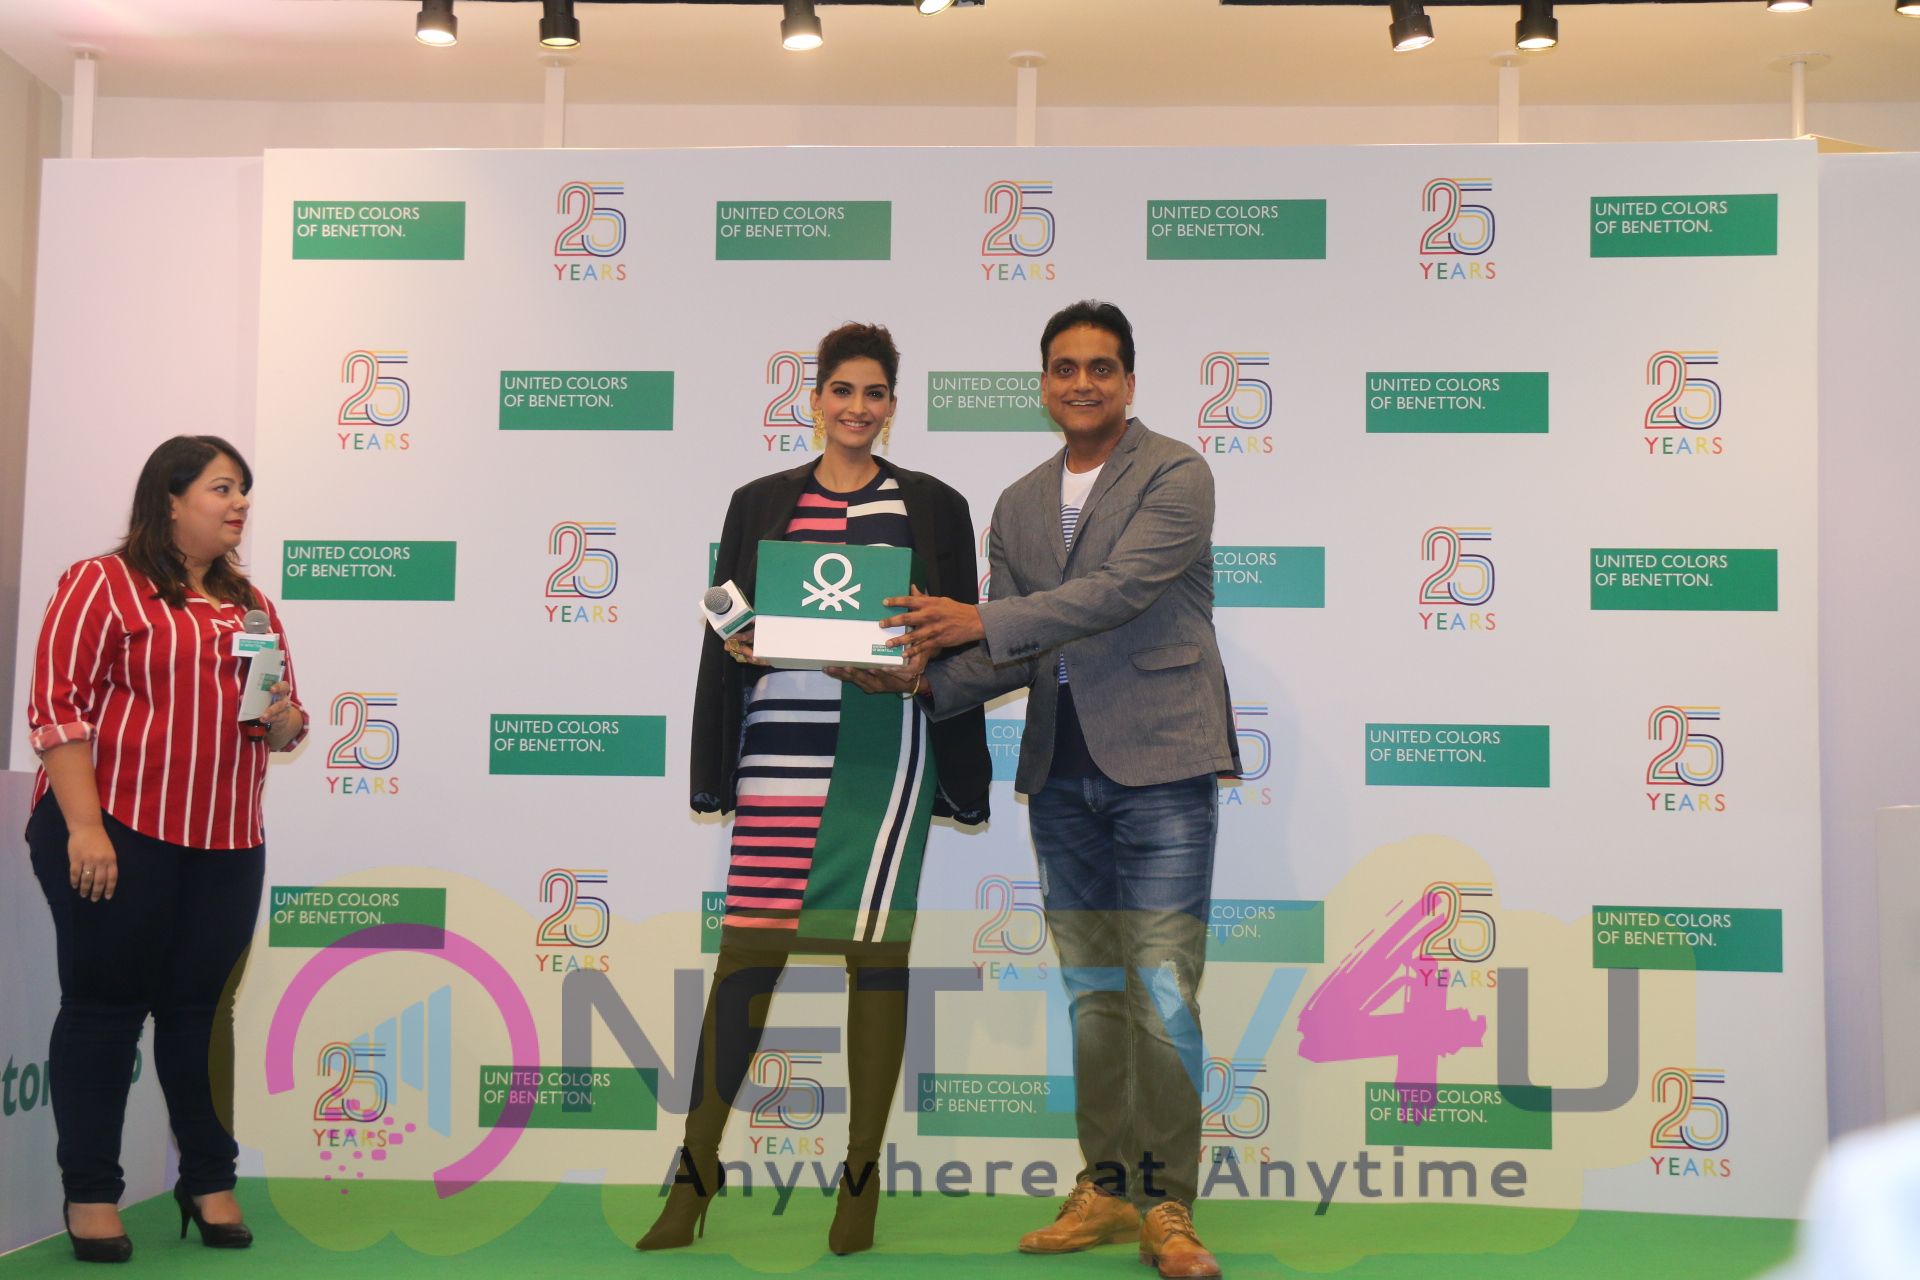 Sonam Kapoor During The 25 Years Celebration Of Benetton India Of Heritage And Values In India At United Colors Of Benetton Imag